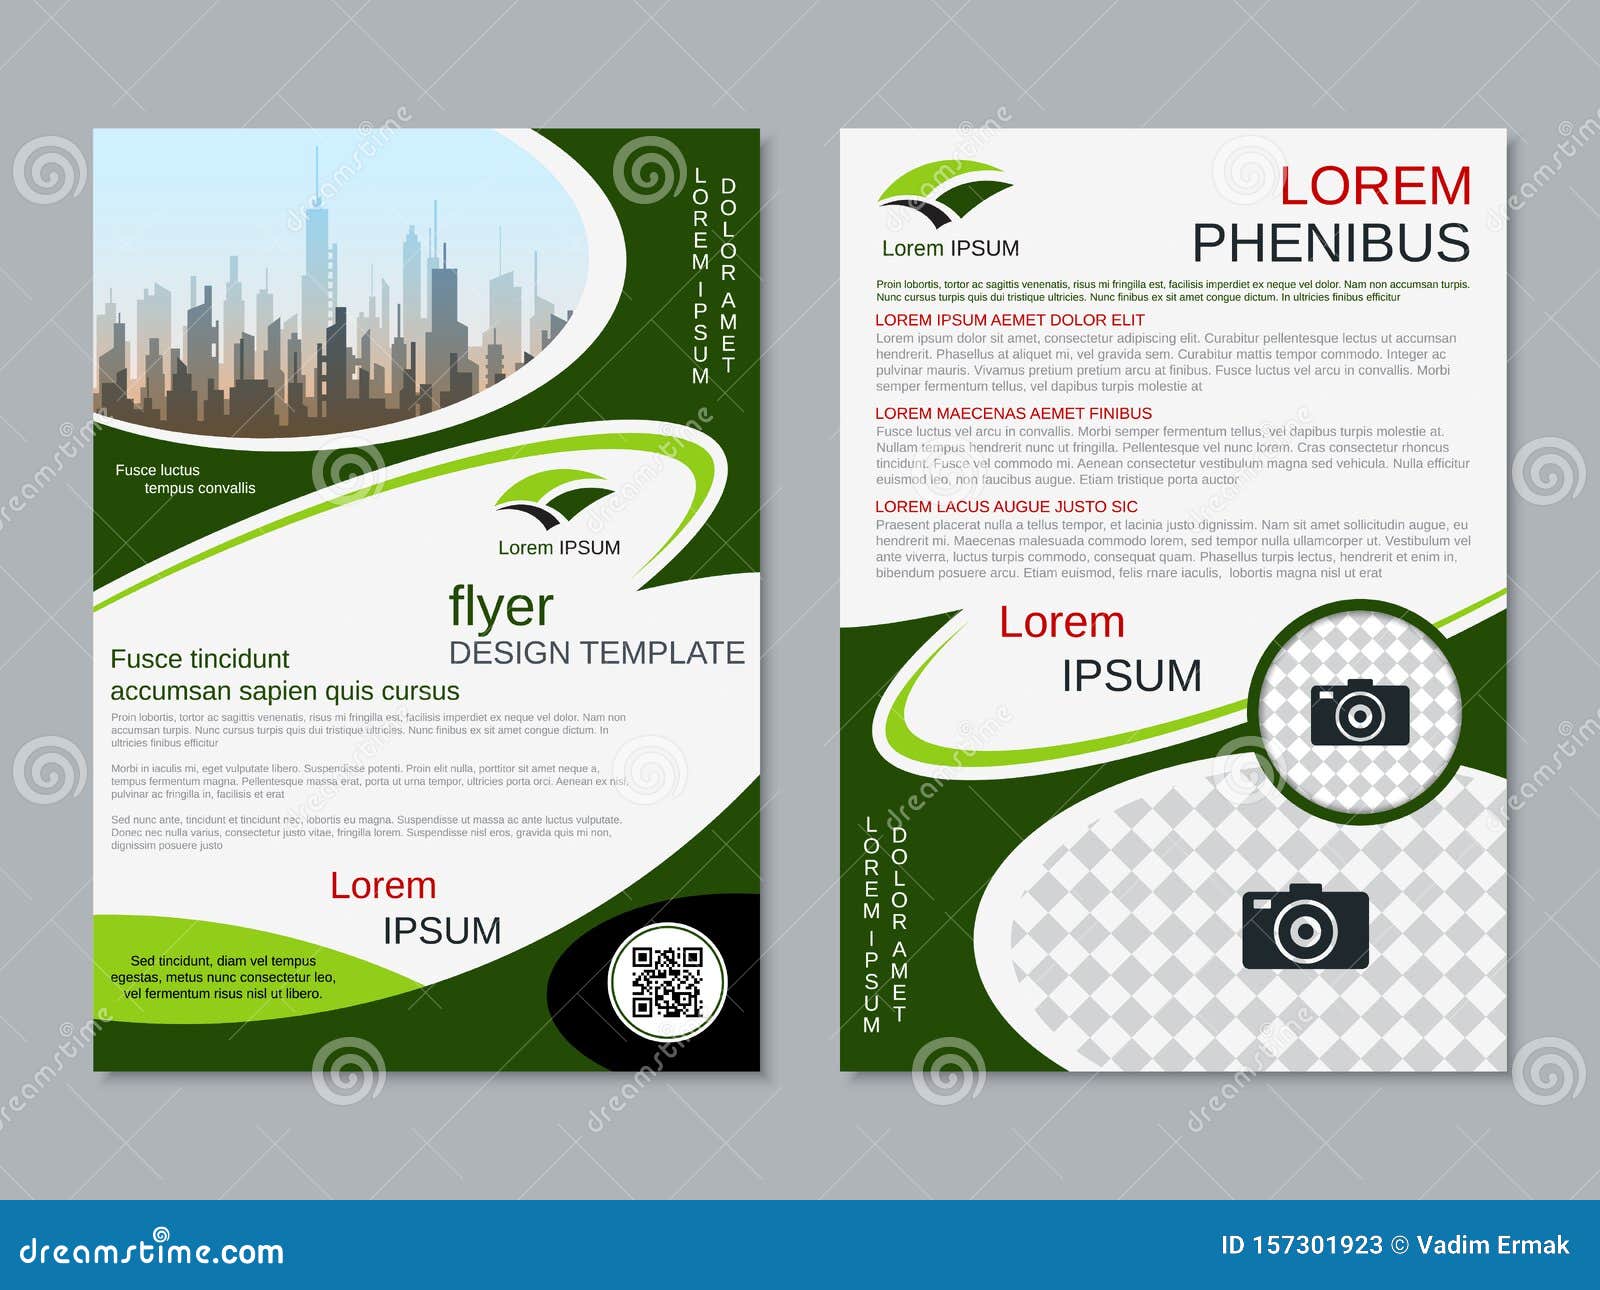 Modern Professional Two-sided Flyer Vector Design Template ...